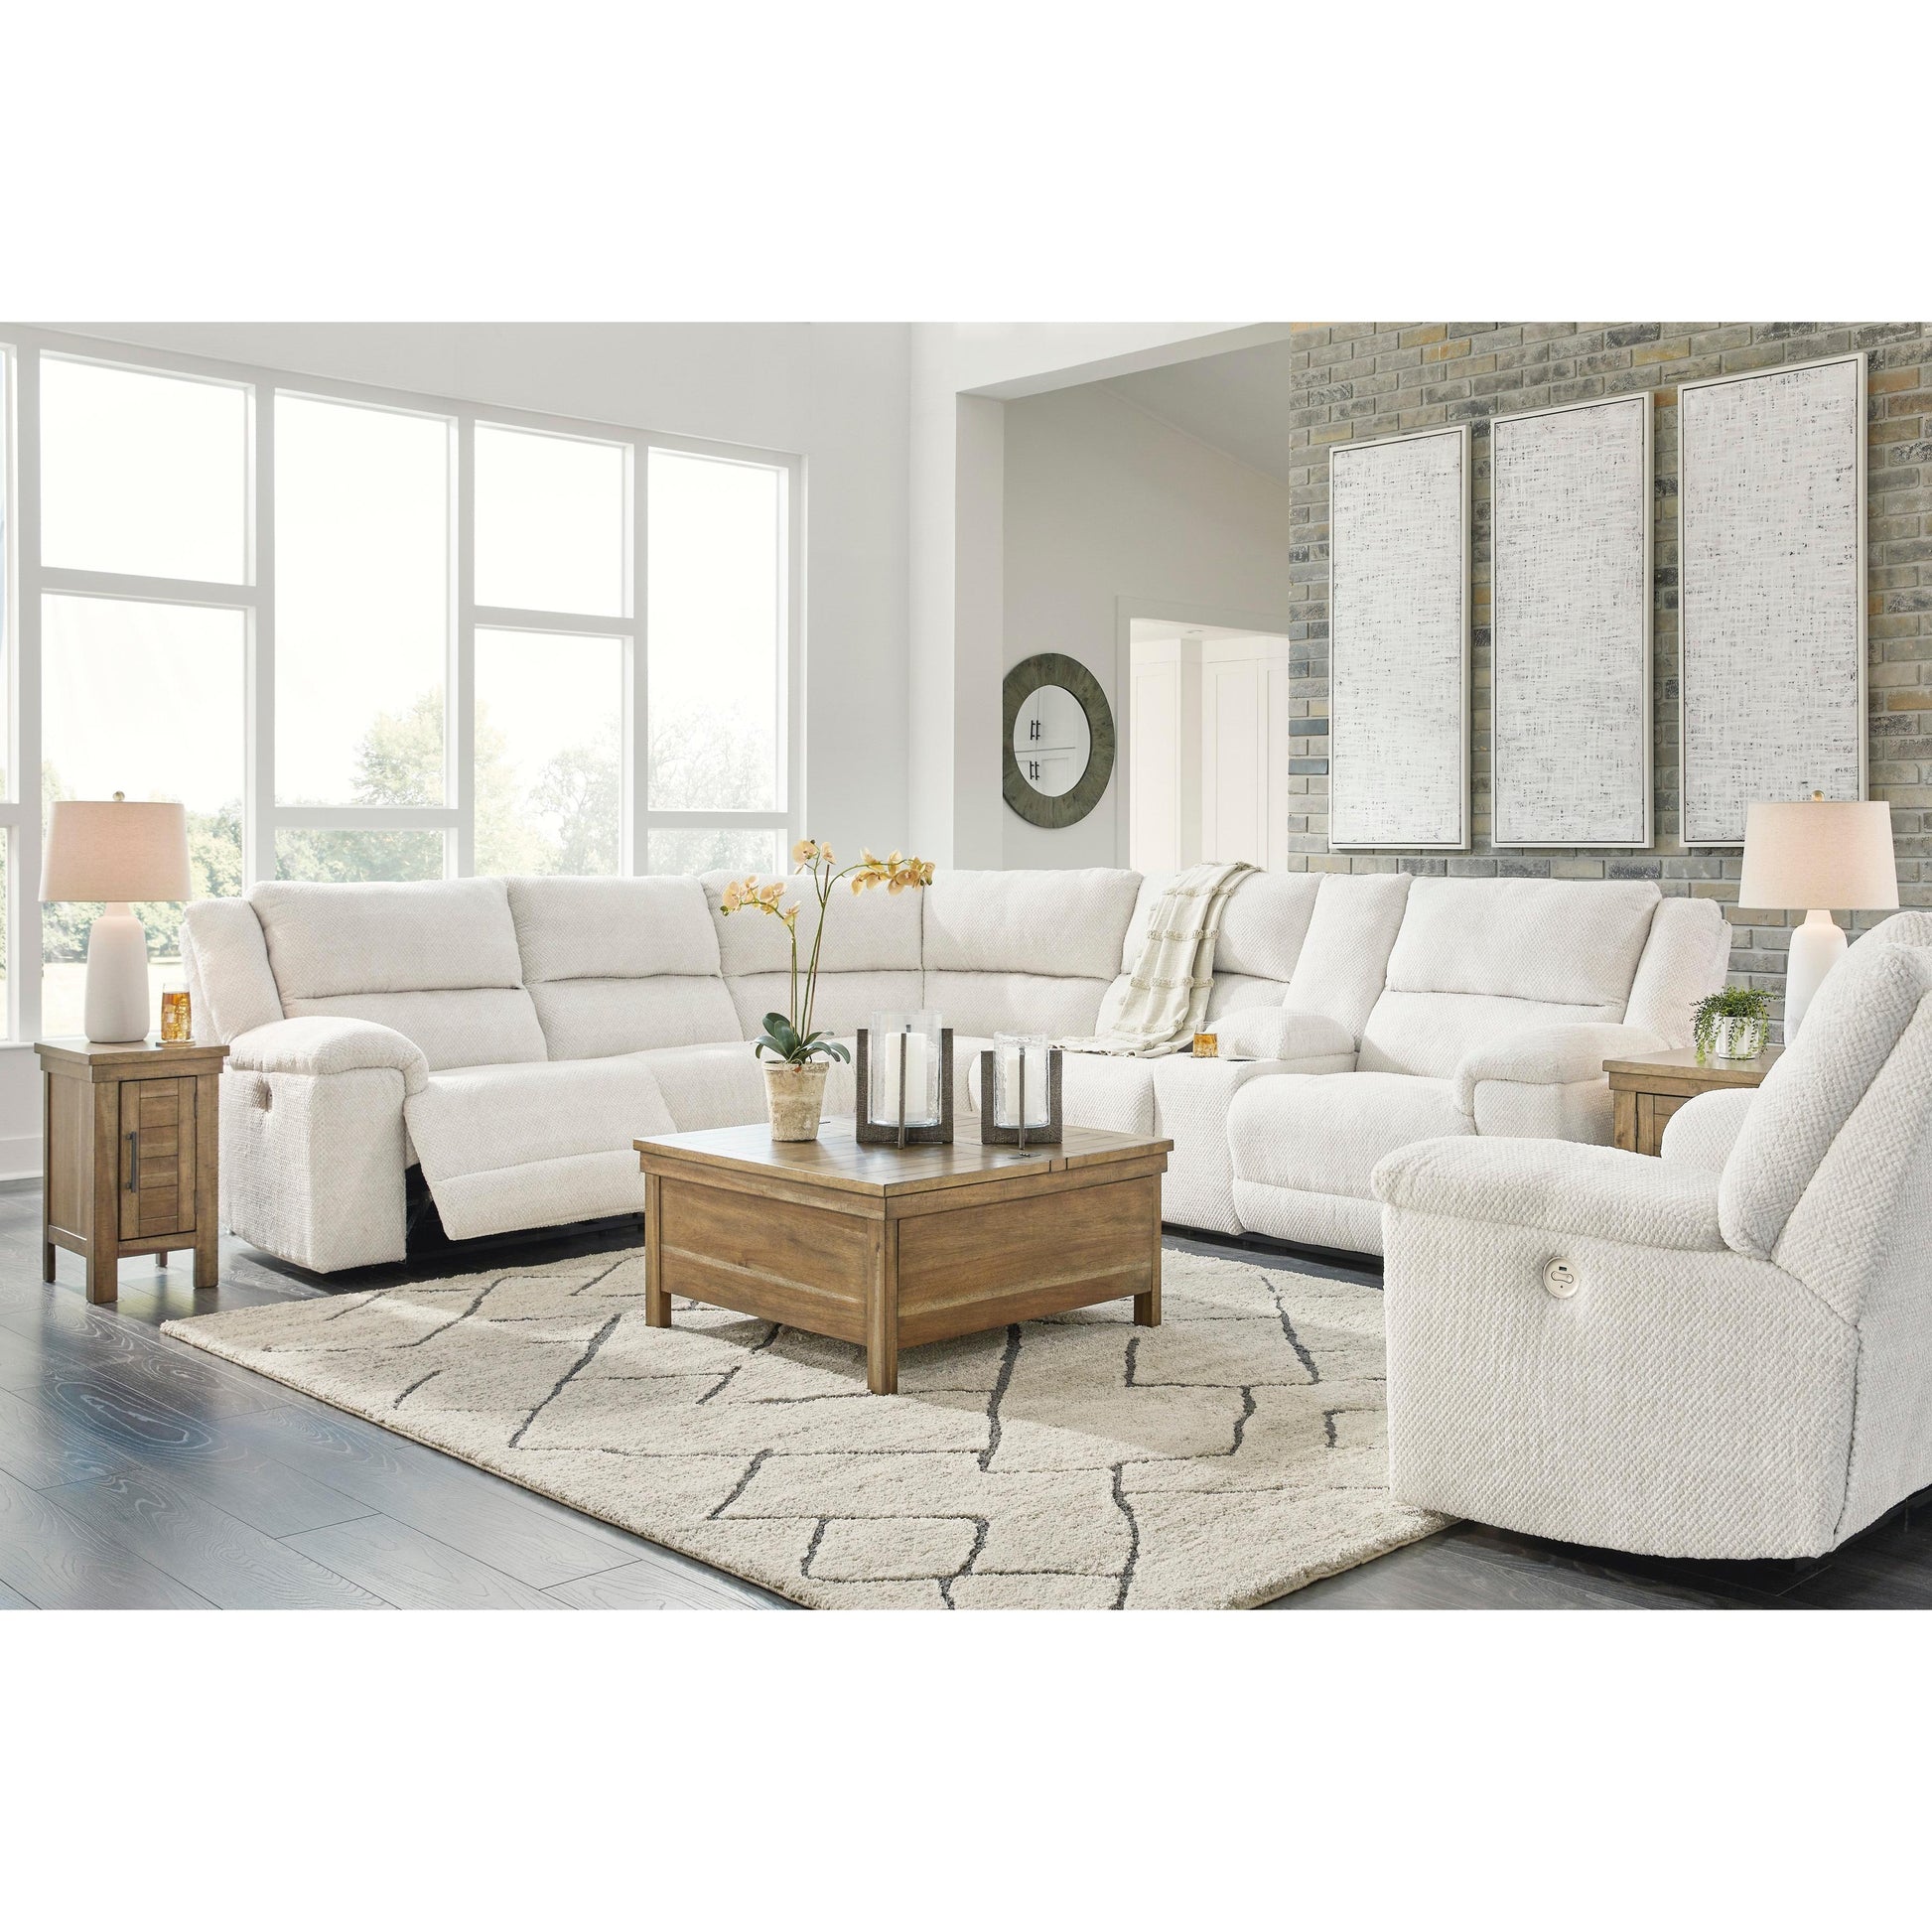 Signature Design by Ashley Keensburg Power Reclining Fabric 3 pc Sectional 6180763/6180777/6180790 IMAGE 4